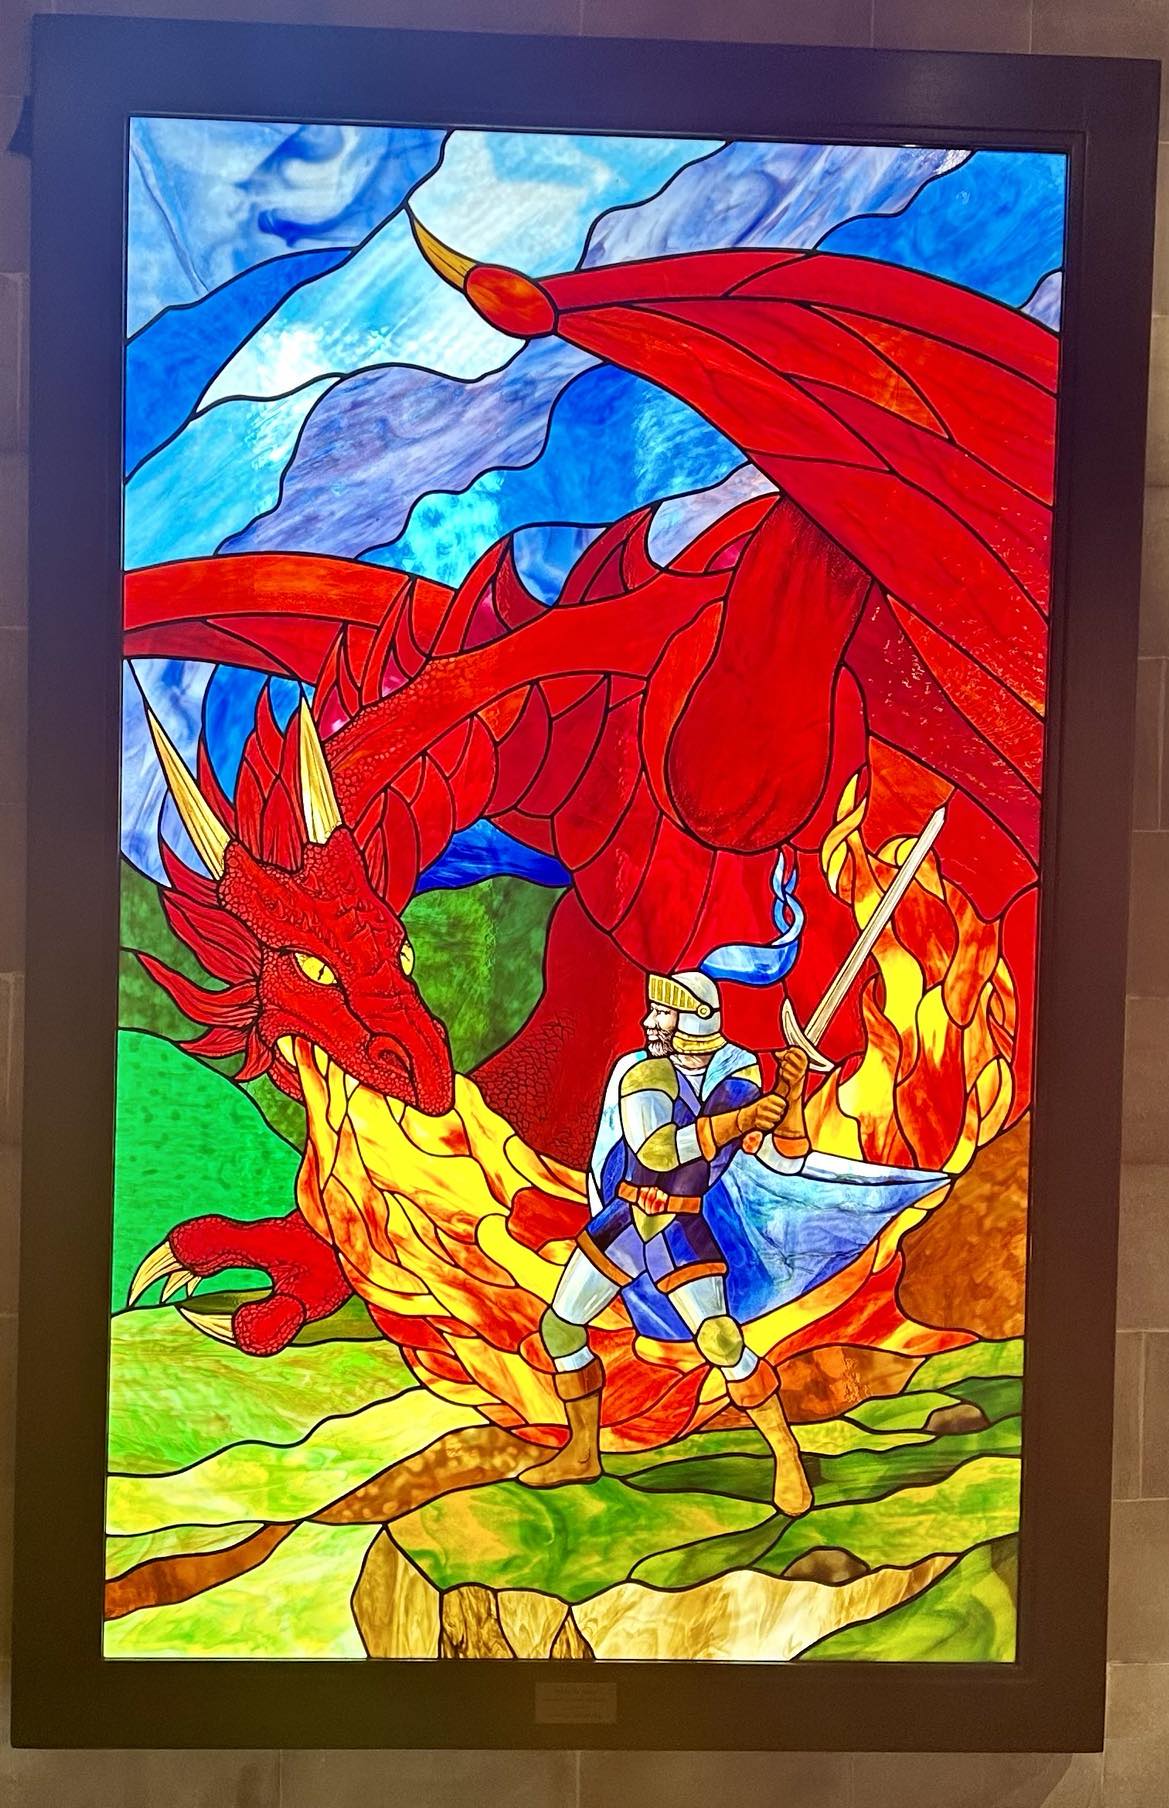 Dragon stained glass at Wizard of Lake Geneva exhibit, Geneval Lake Museum